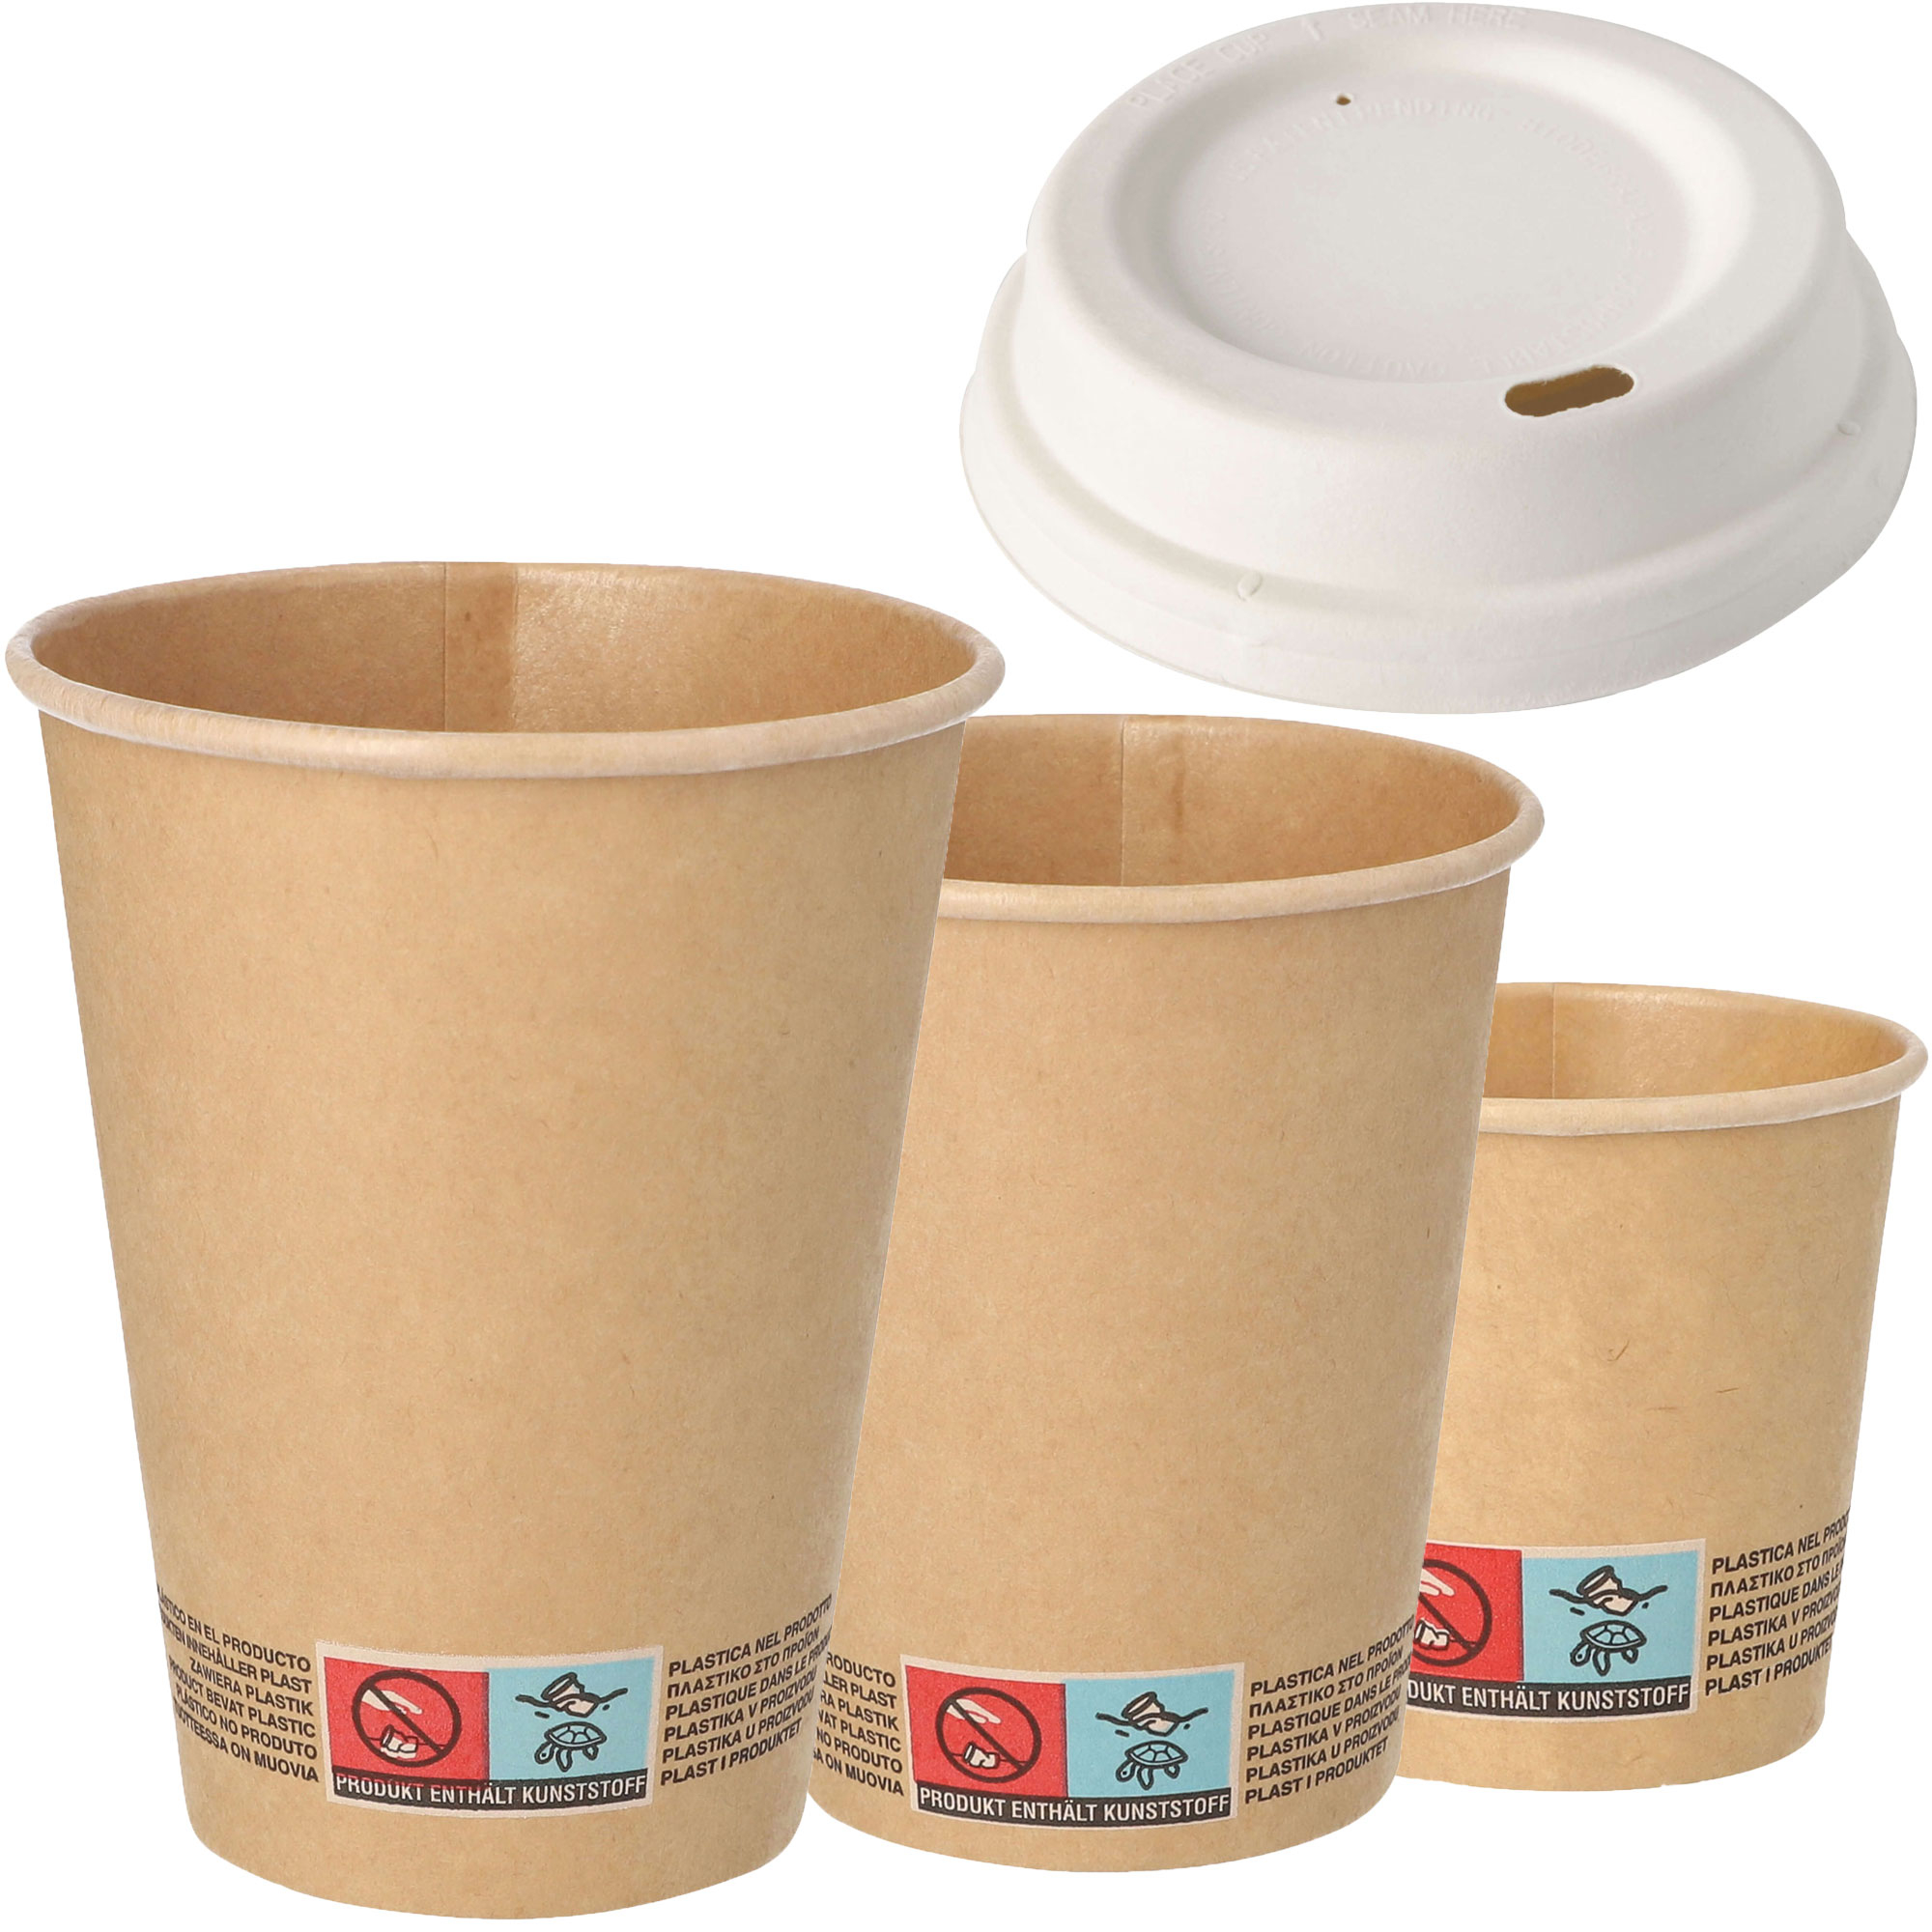 Espresso and Coffee cups and lids - various sizes